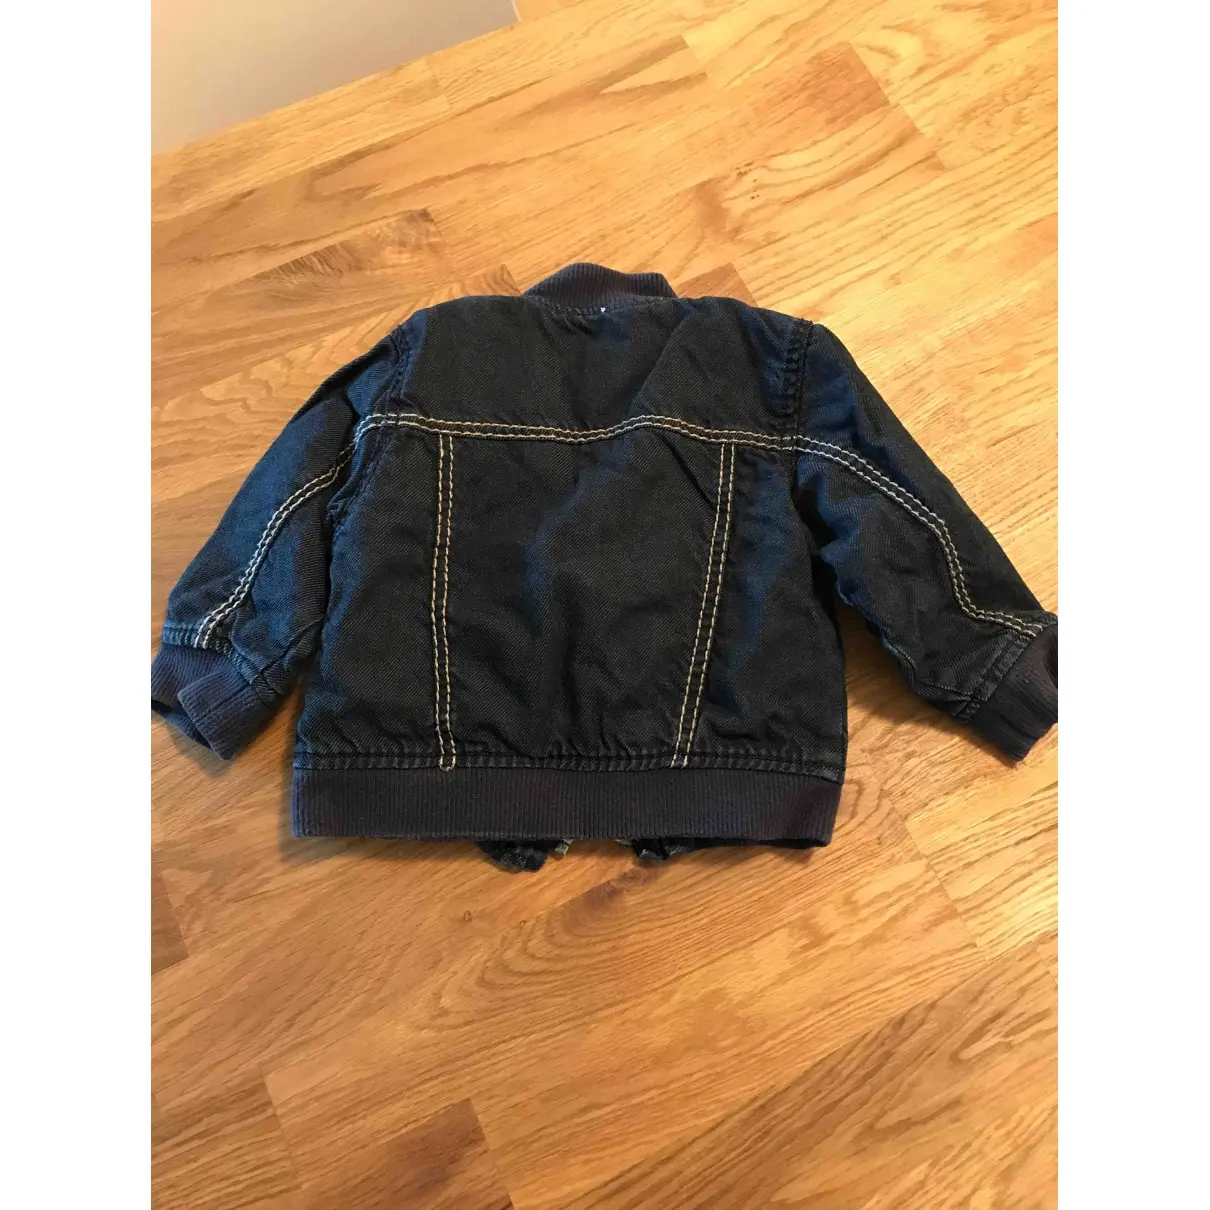 Burberry Jacket for sale